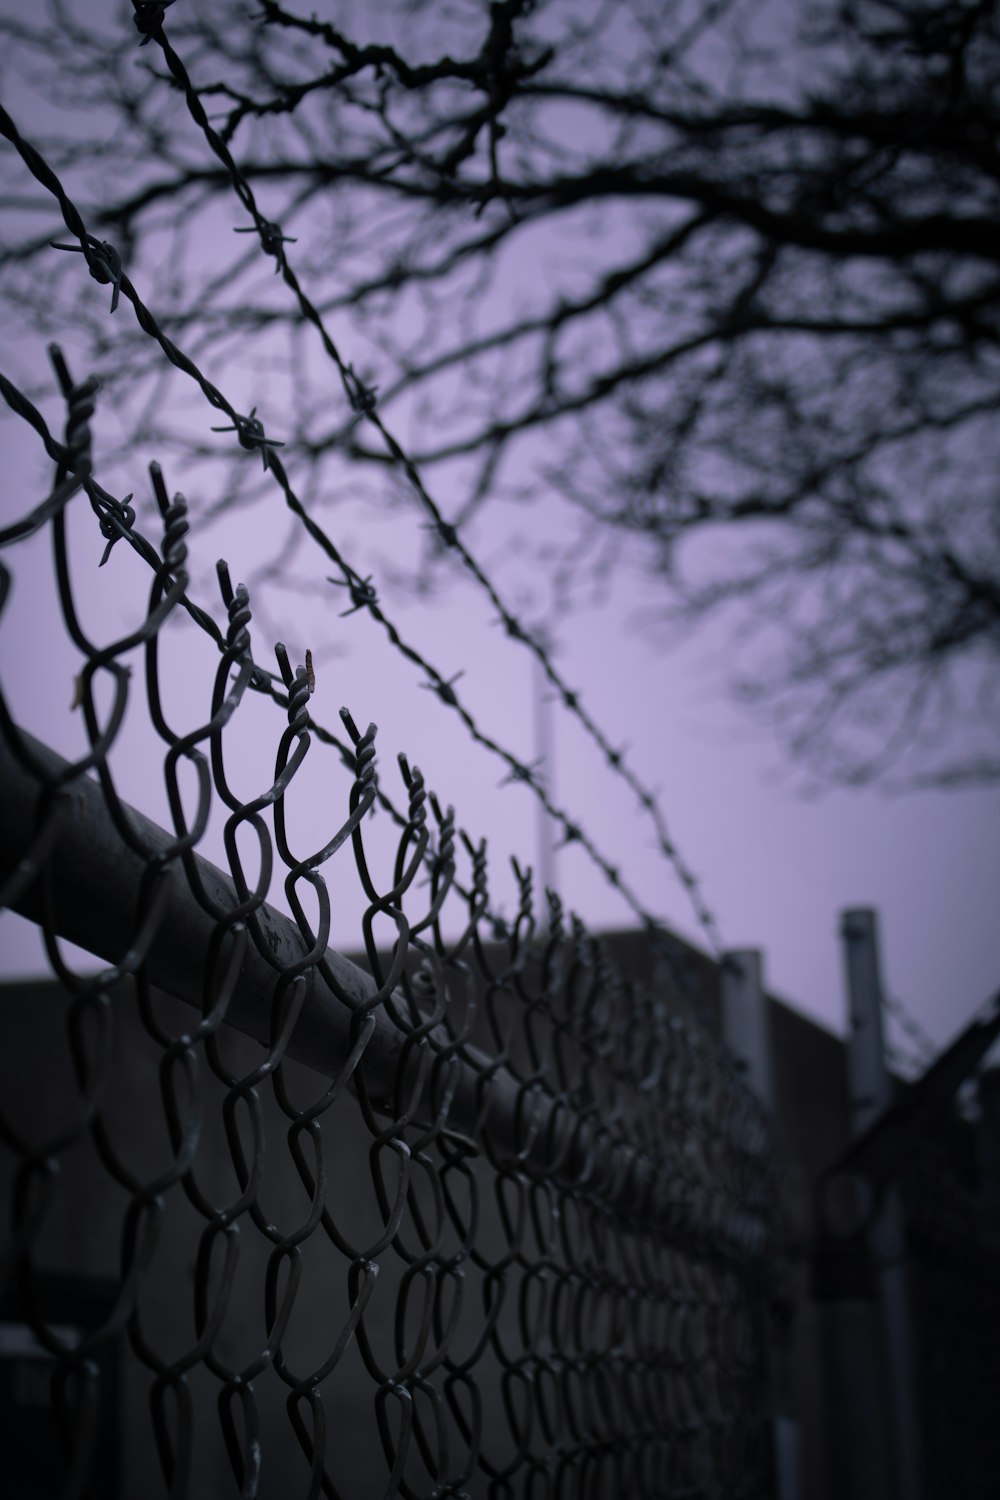 a chain link fence with a building in the background